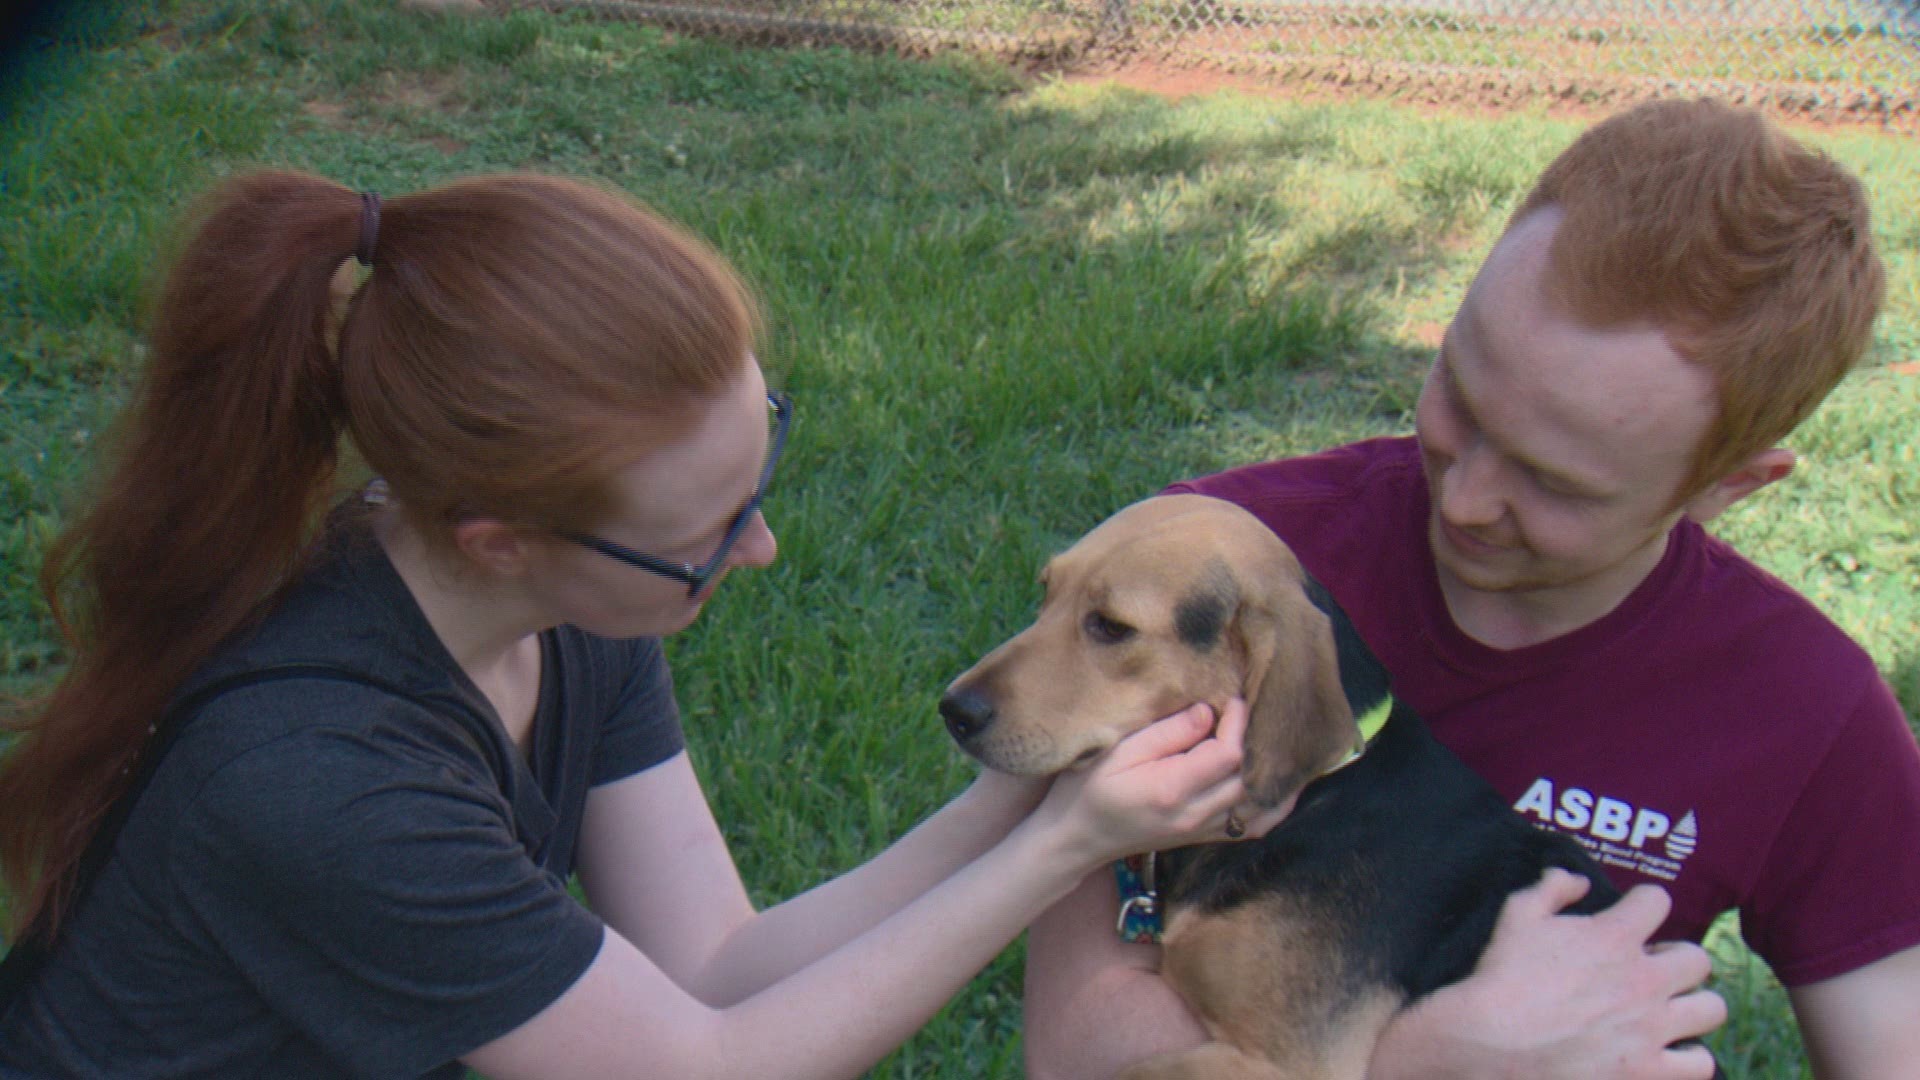 Pet Paradise and WCNC teamed up with local shelters to waive or reduce adoption fees Saturday as part of a nationwide effort to help pets find homes.